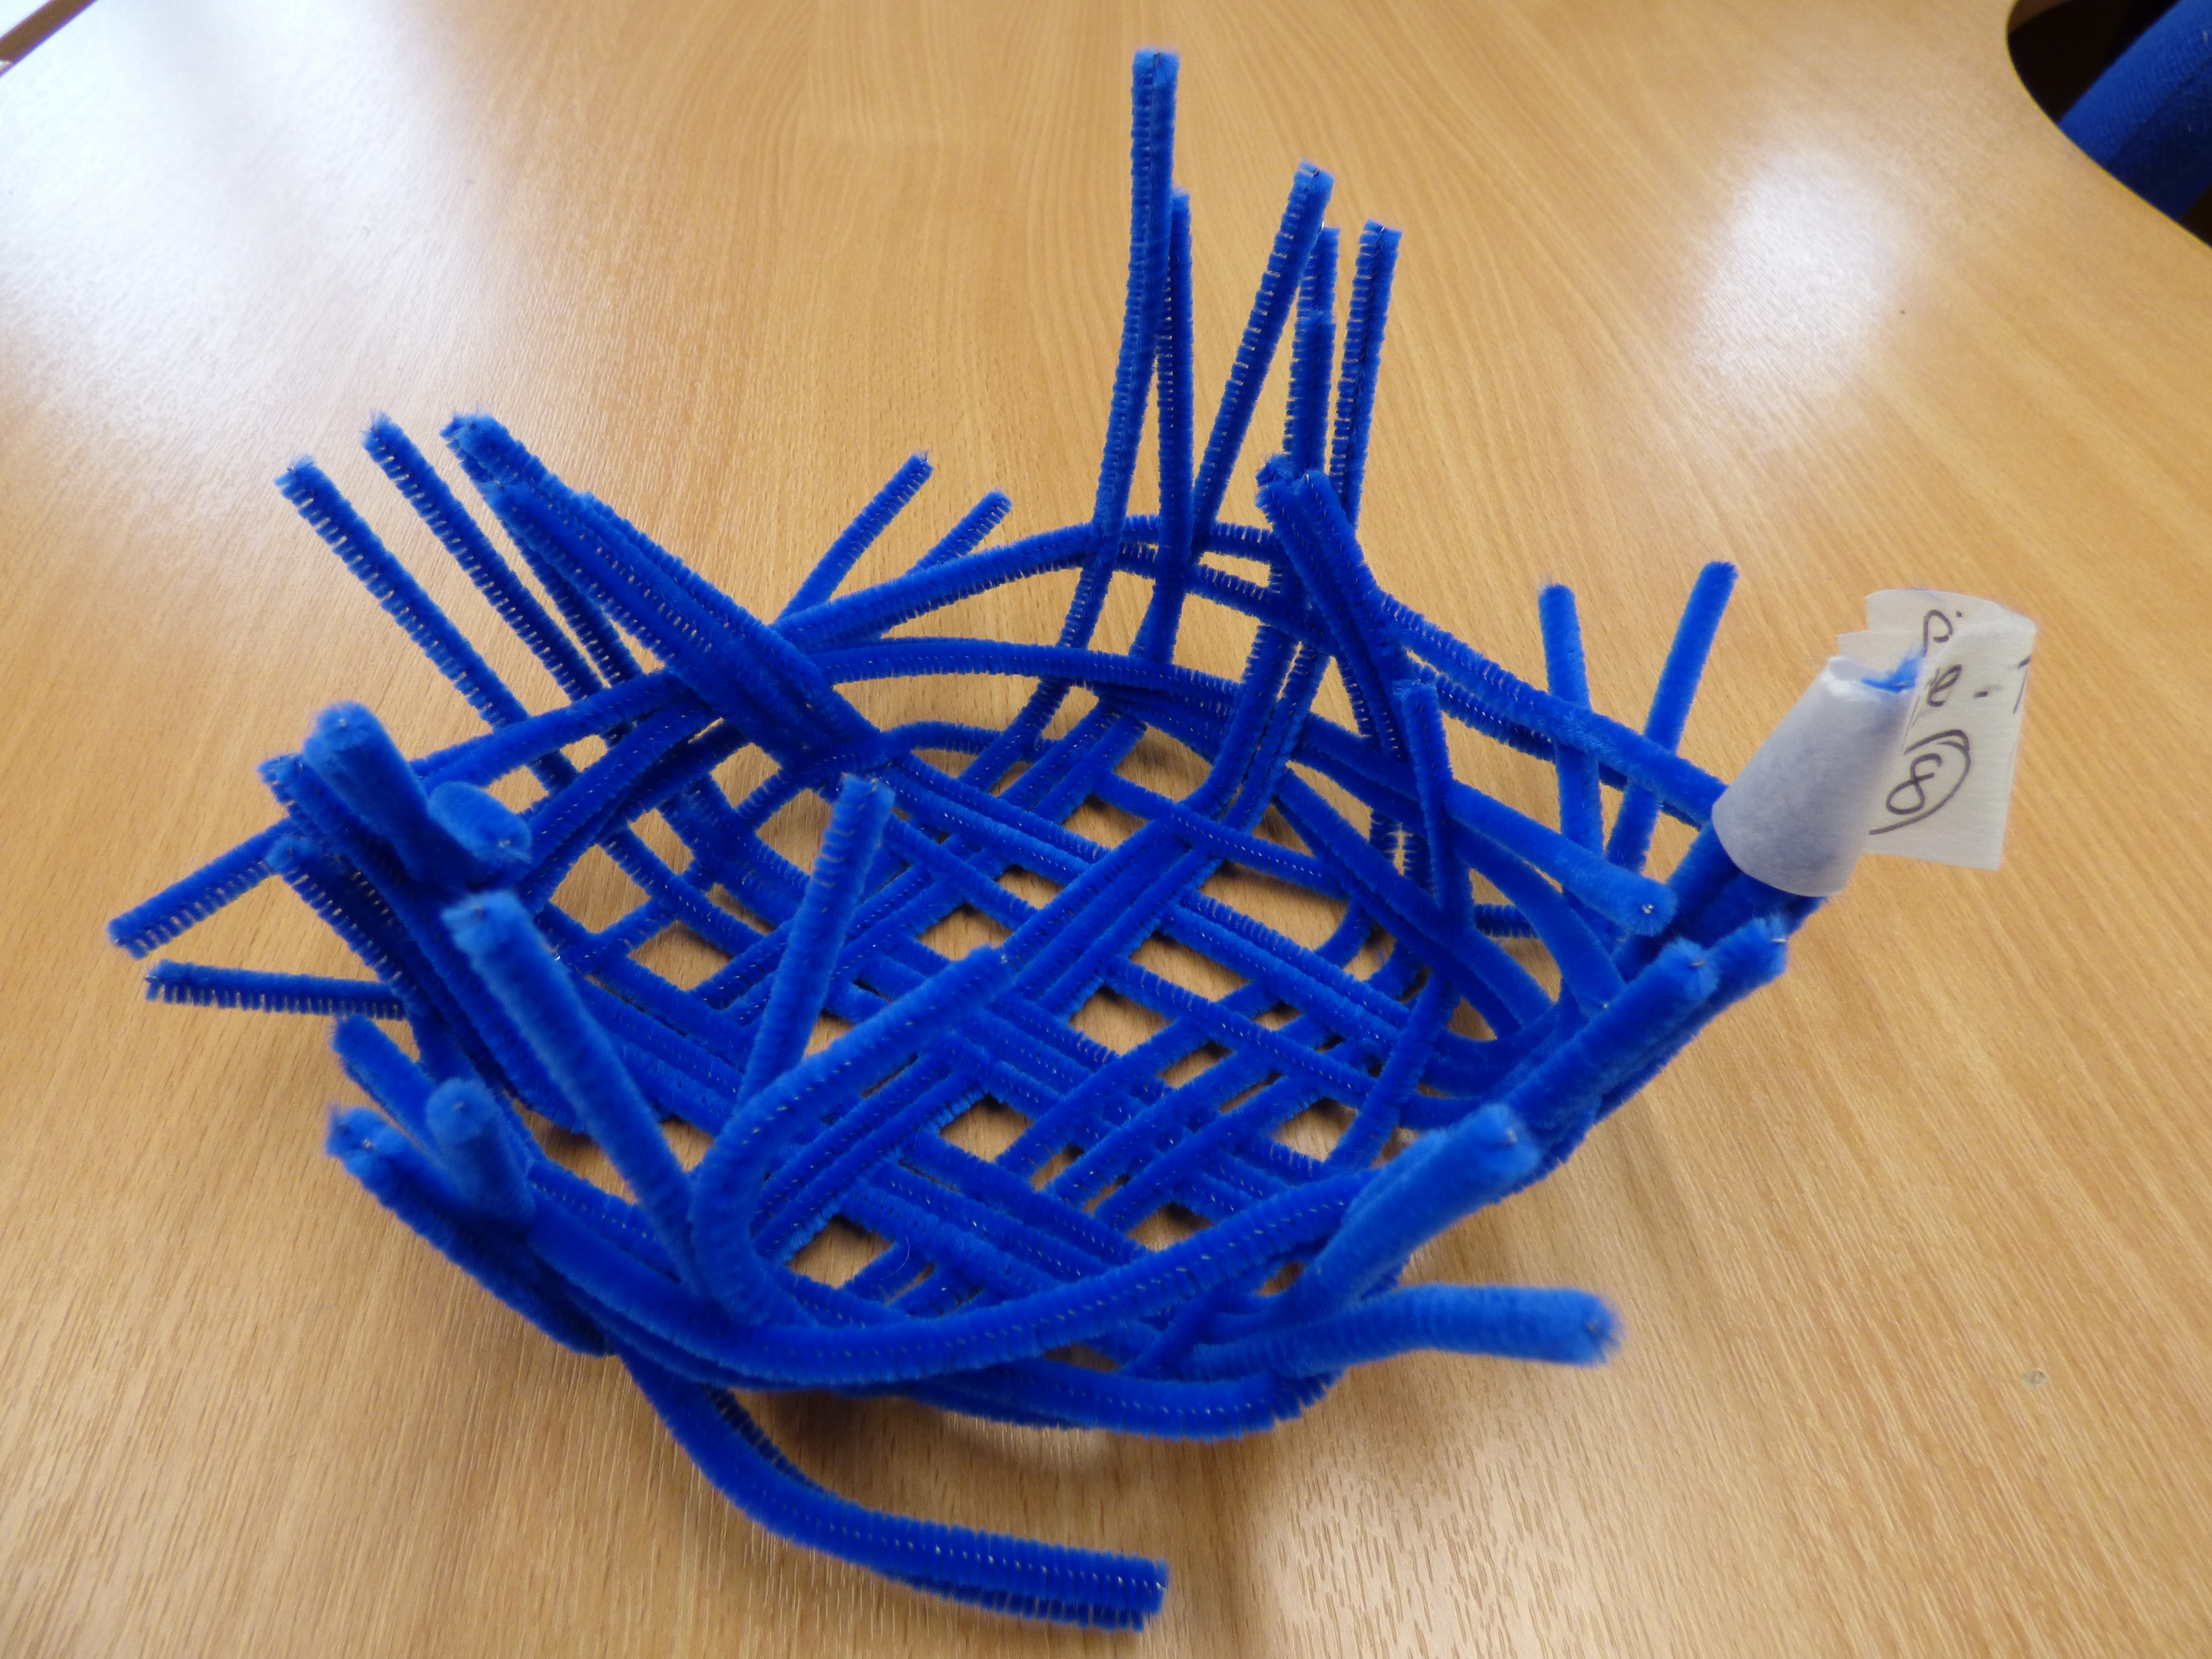 A basket made of pipe cleaners